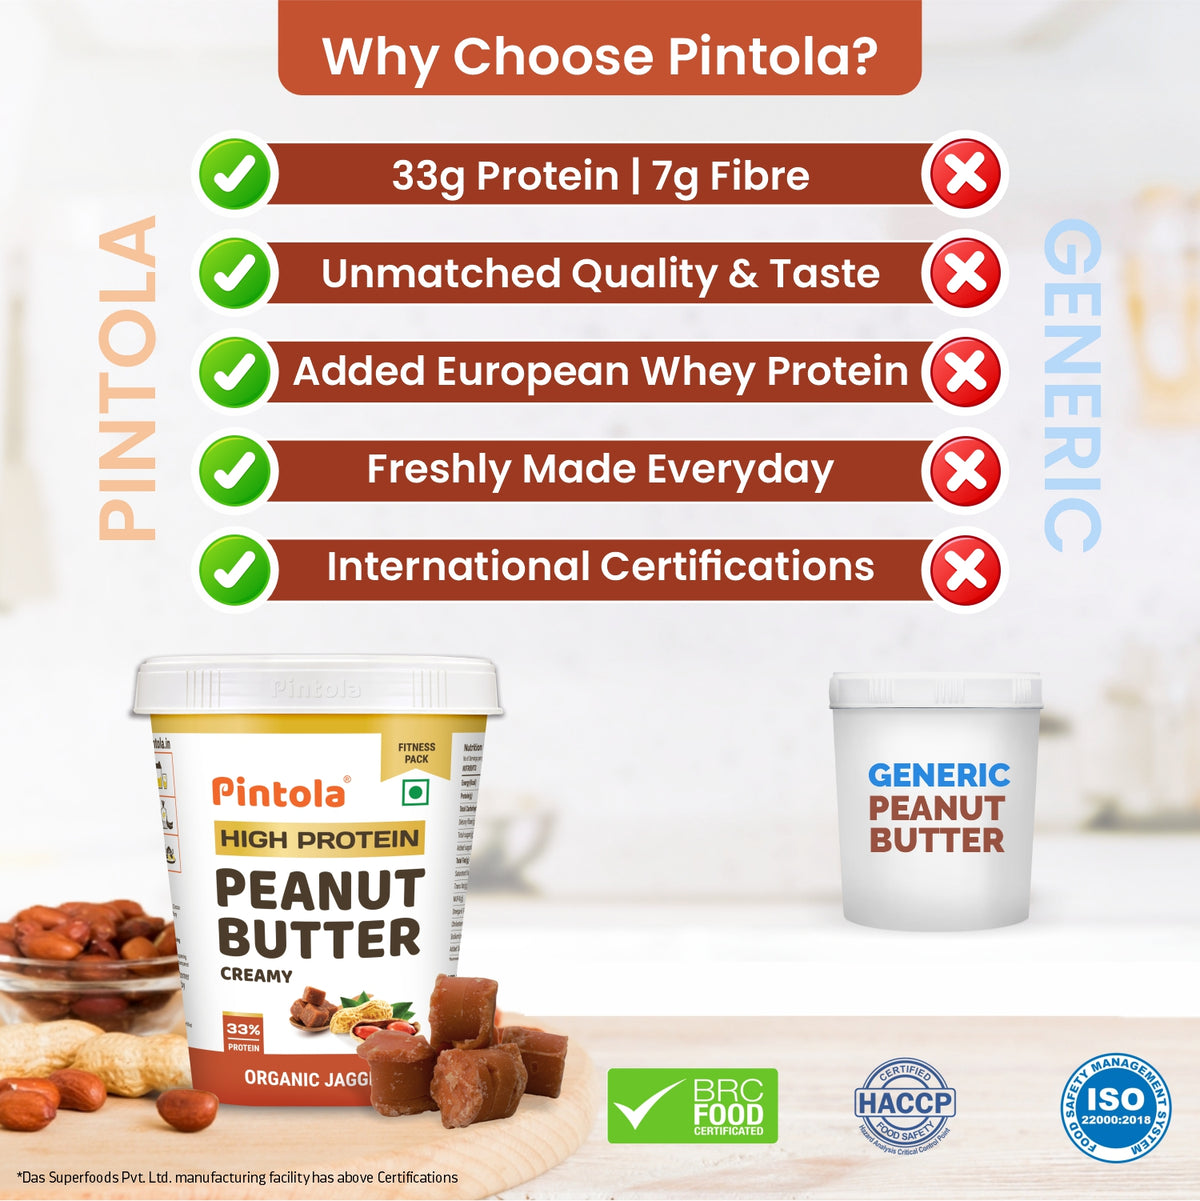 High Protein Peanut Butter with Organic Jaggery